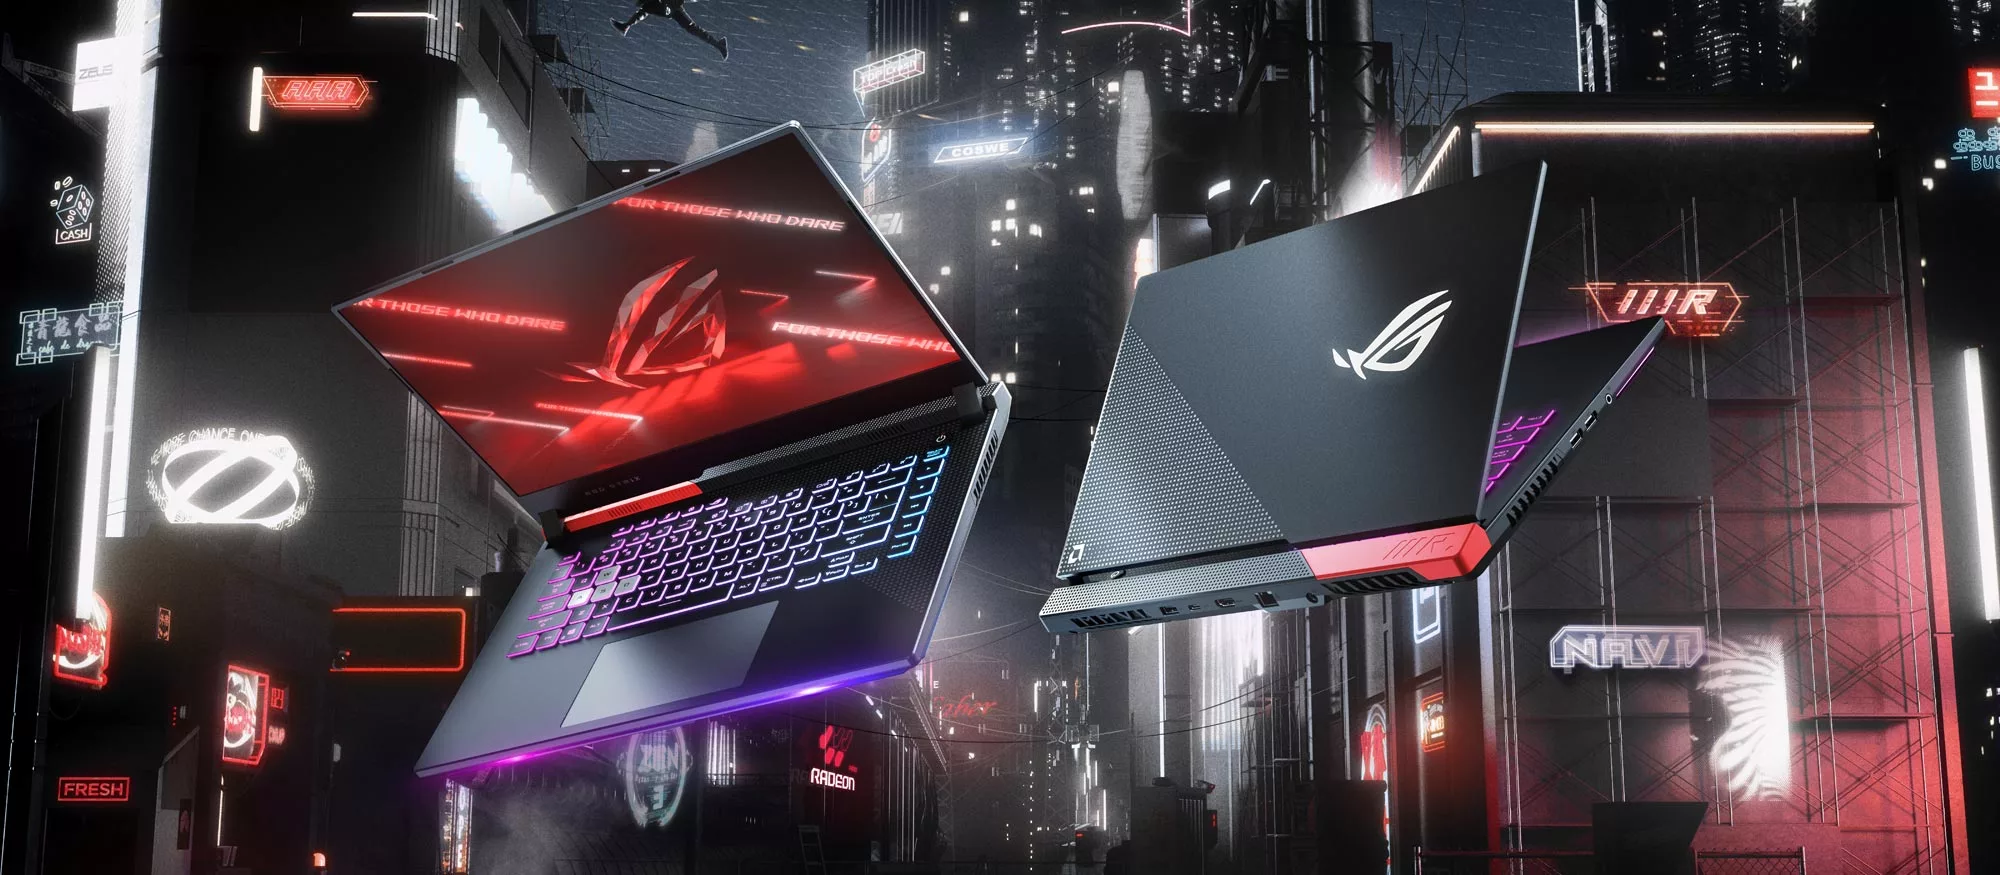 Promotional render of the Strix G15 Advantage Edition, with a cyberpunk background.